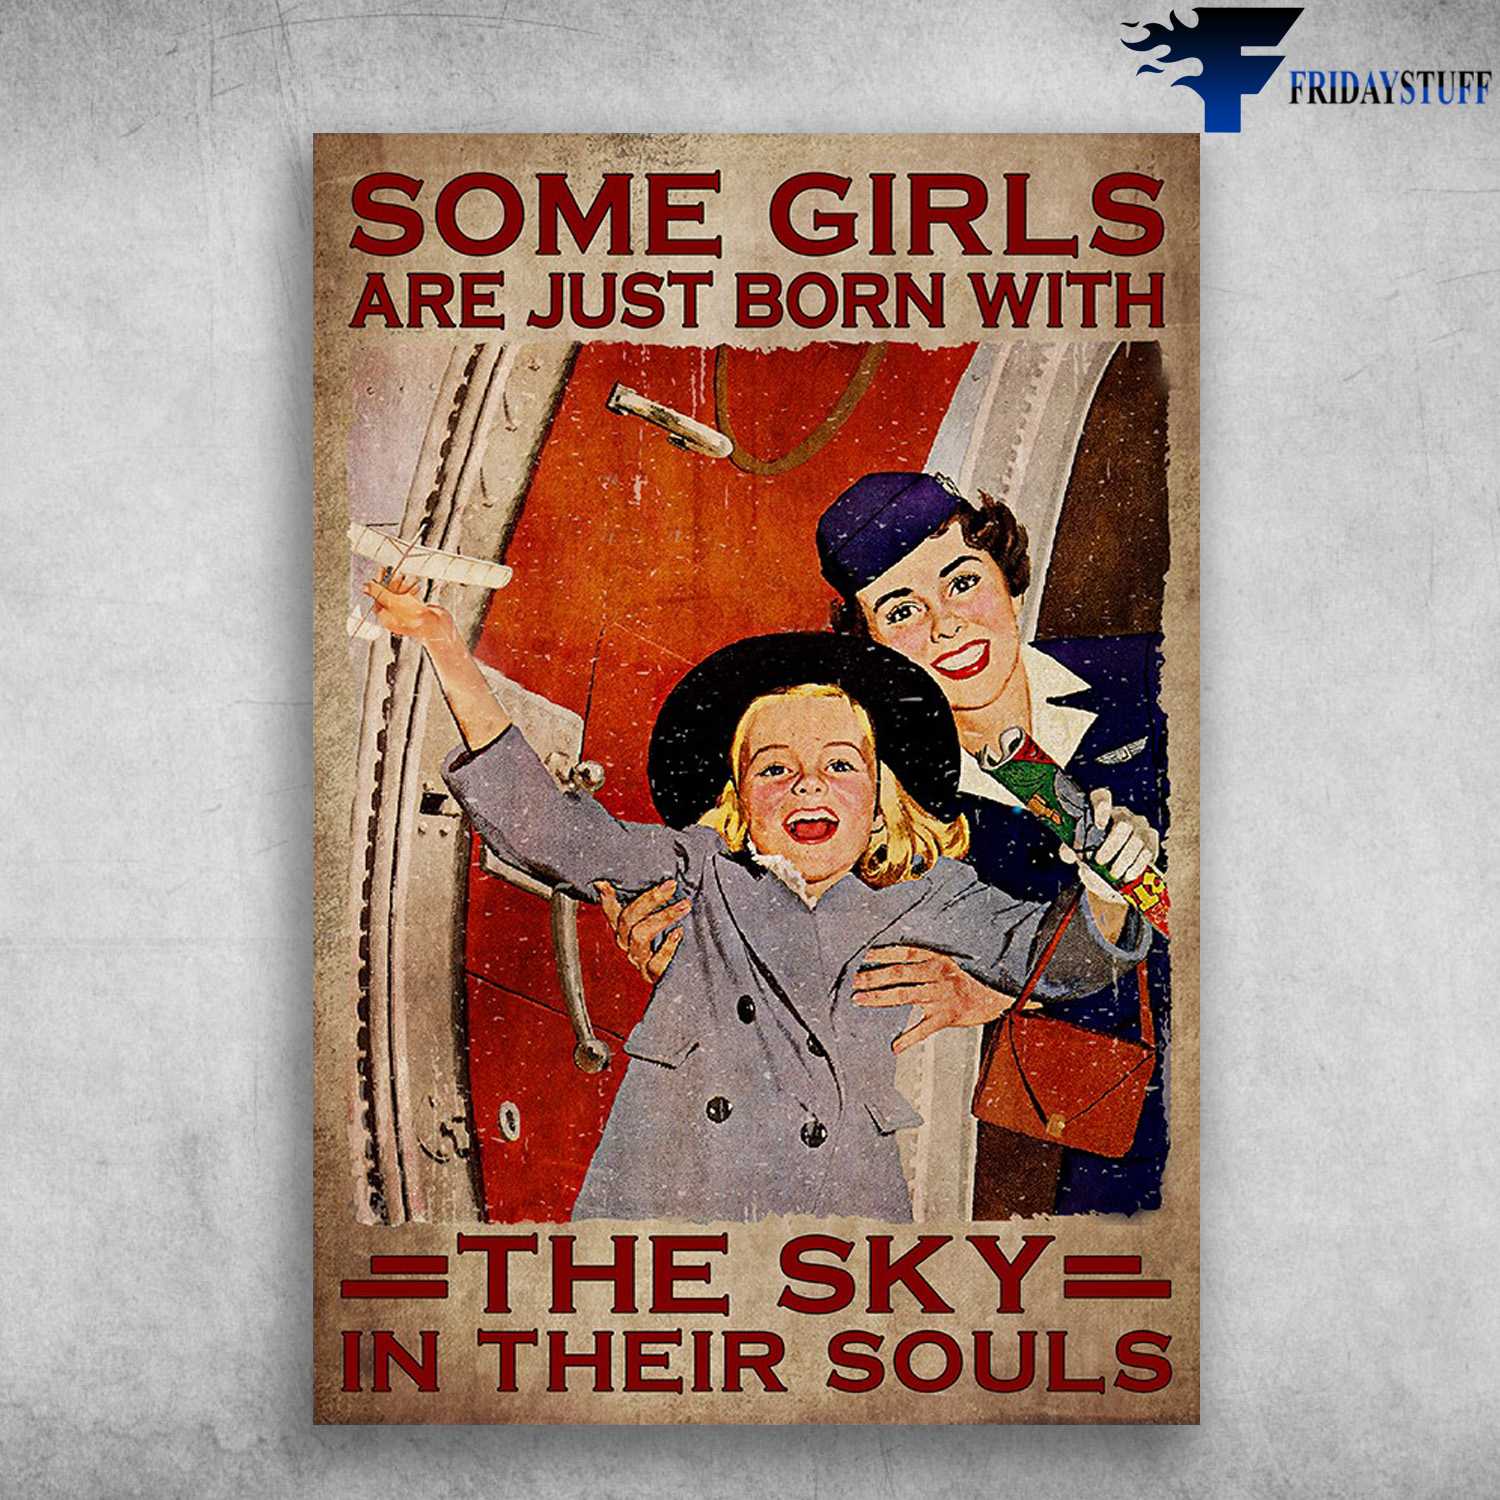 Flight Attendant - Some Girls Are Just Born With, The Sky In Their Souls